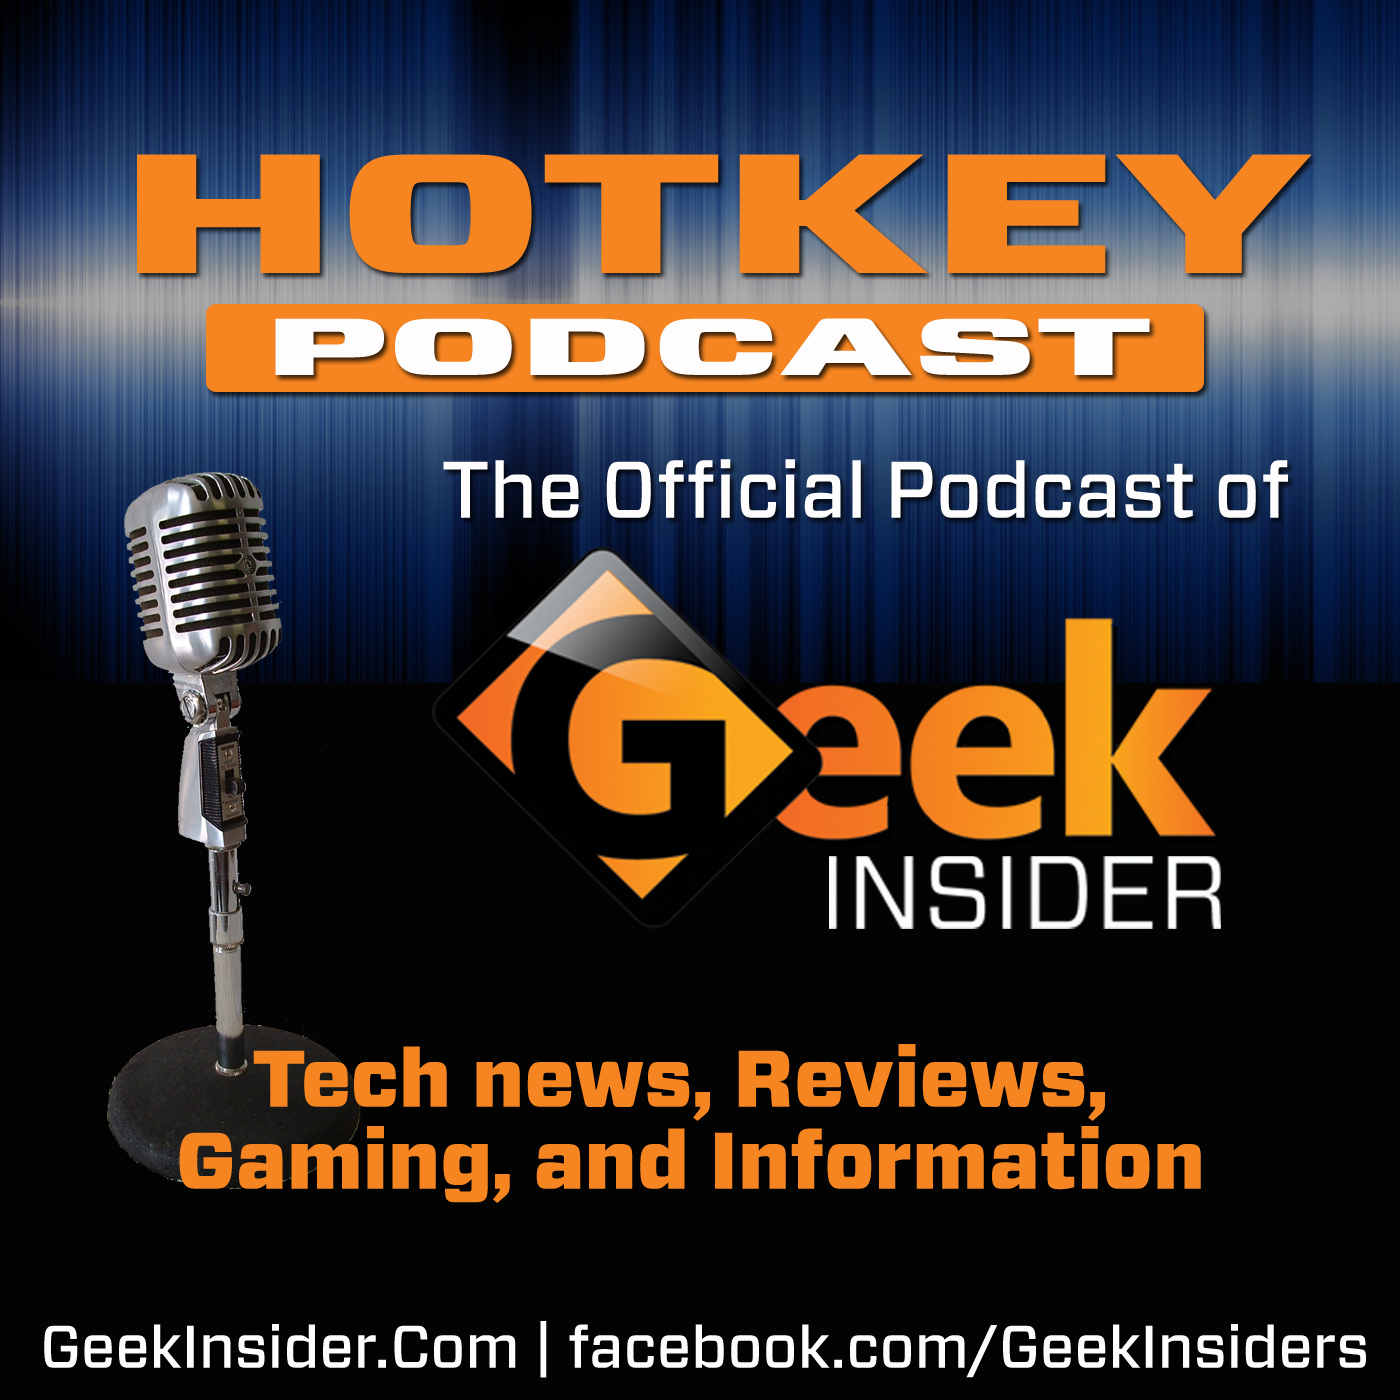 Geek insider, geekinsider, geekinsider. Com,, hotkey: the official podcast of geek insider #2 - 8. 21. 13 featuring popcap games, podcasts